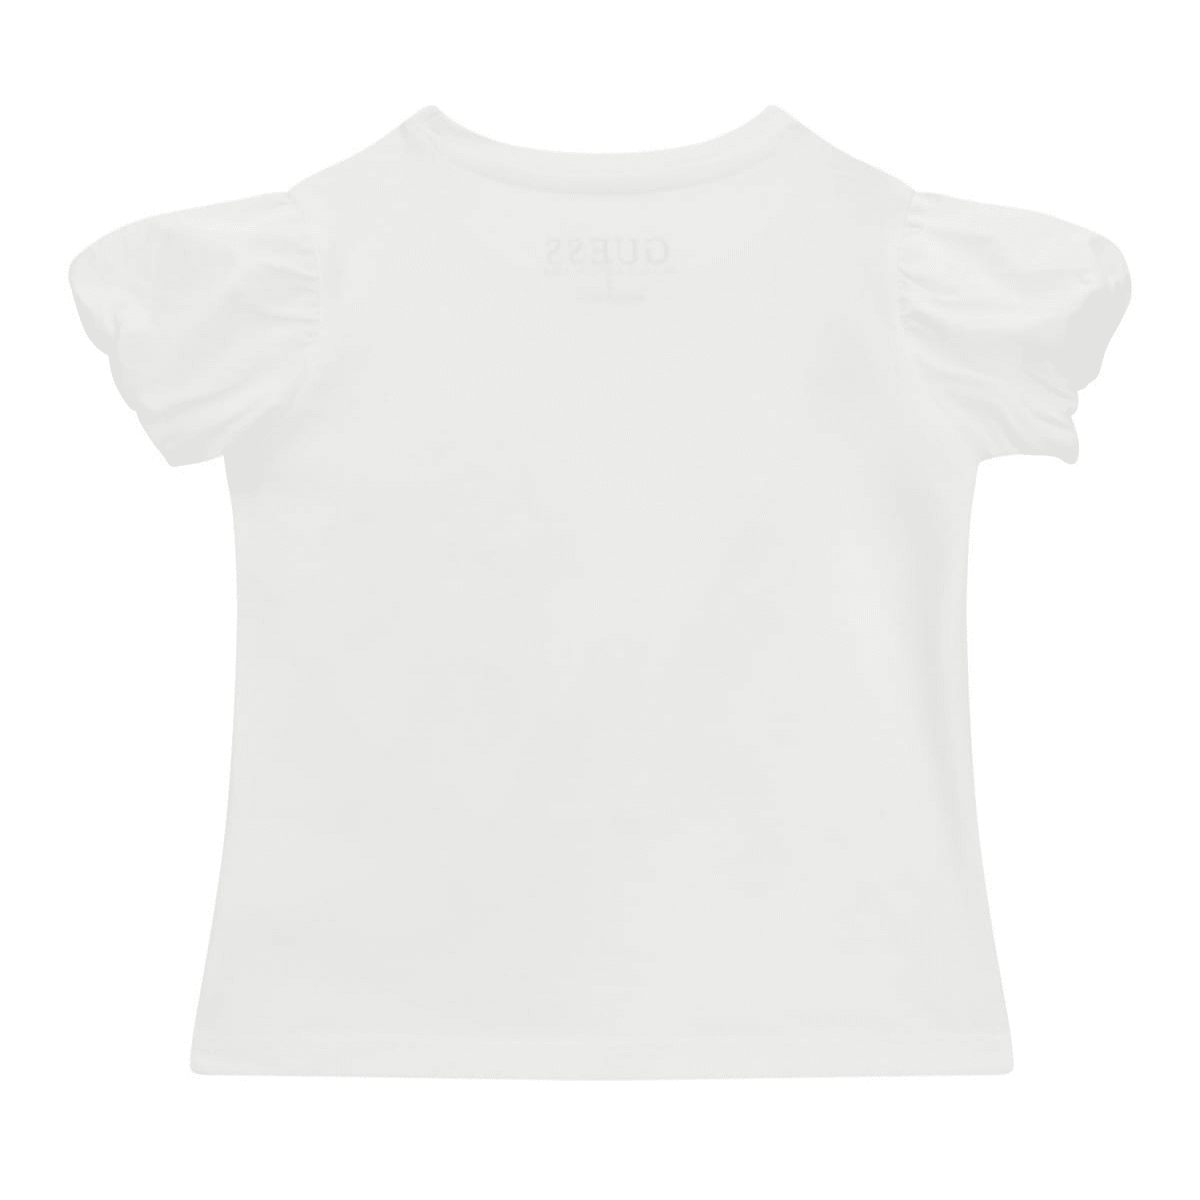 guess girls white tshirt with camera icon back view